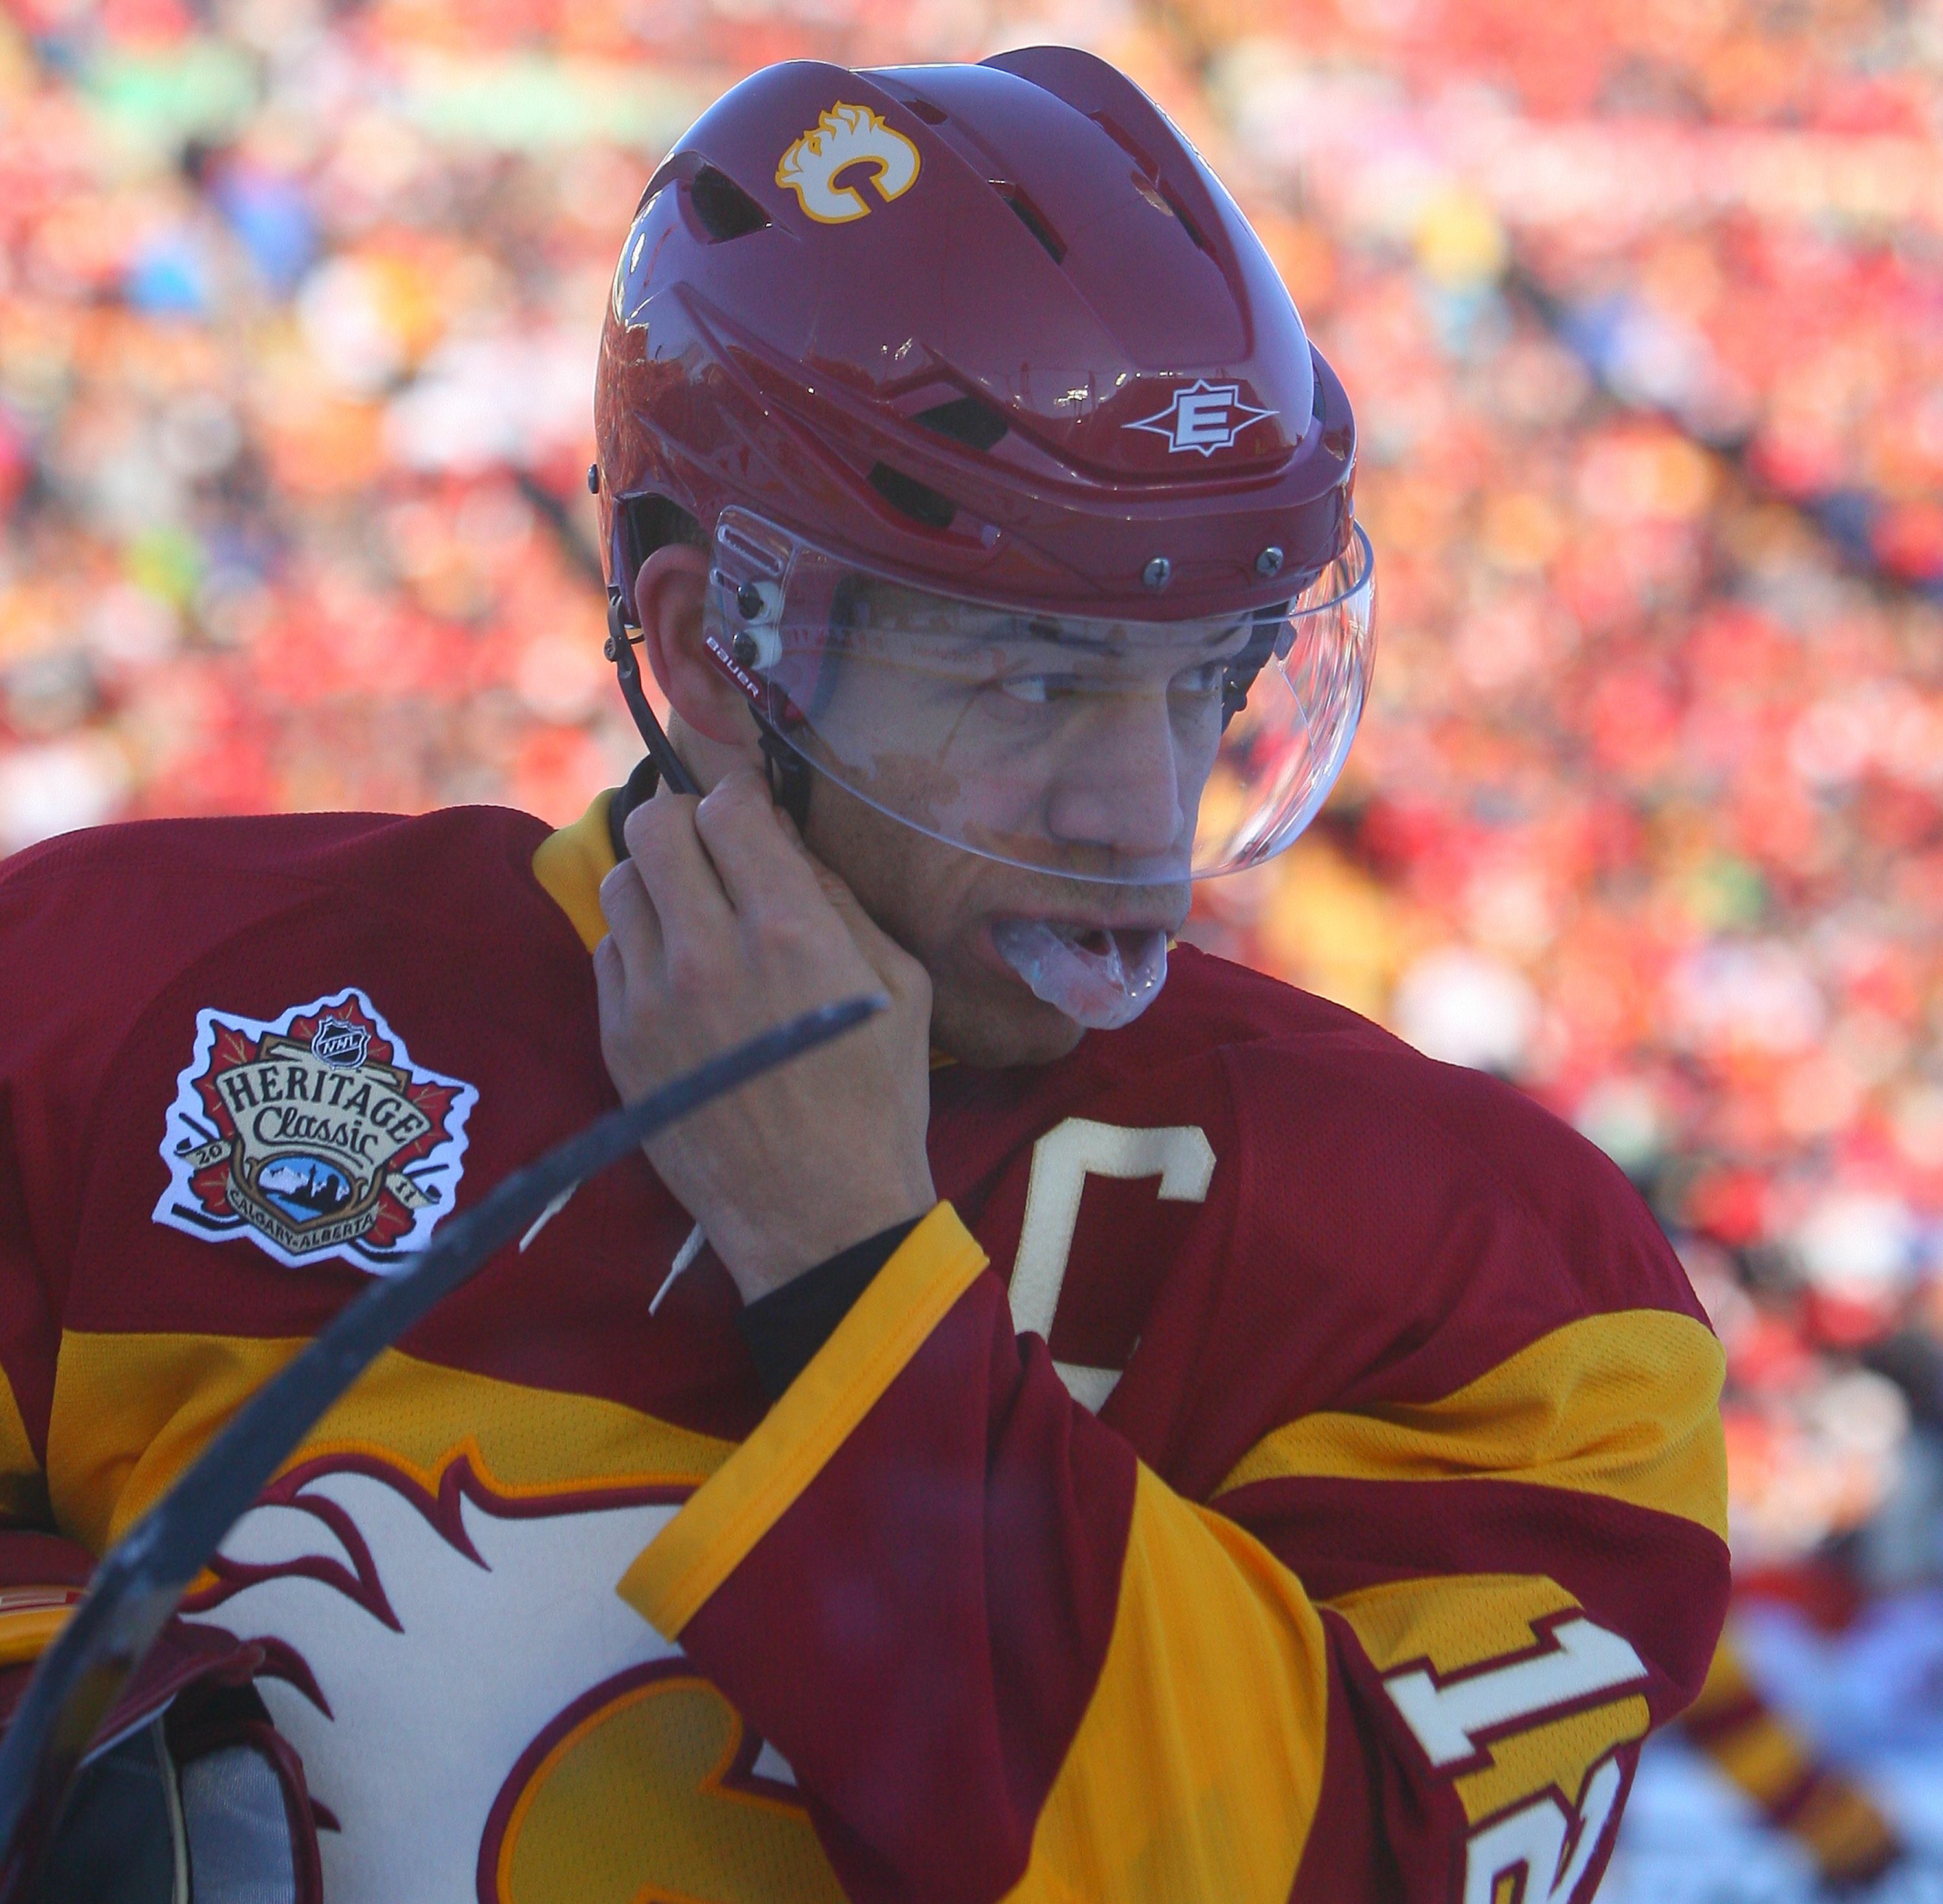 Calgary Flames Top 10 greatest players: Jarome Iginla officially